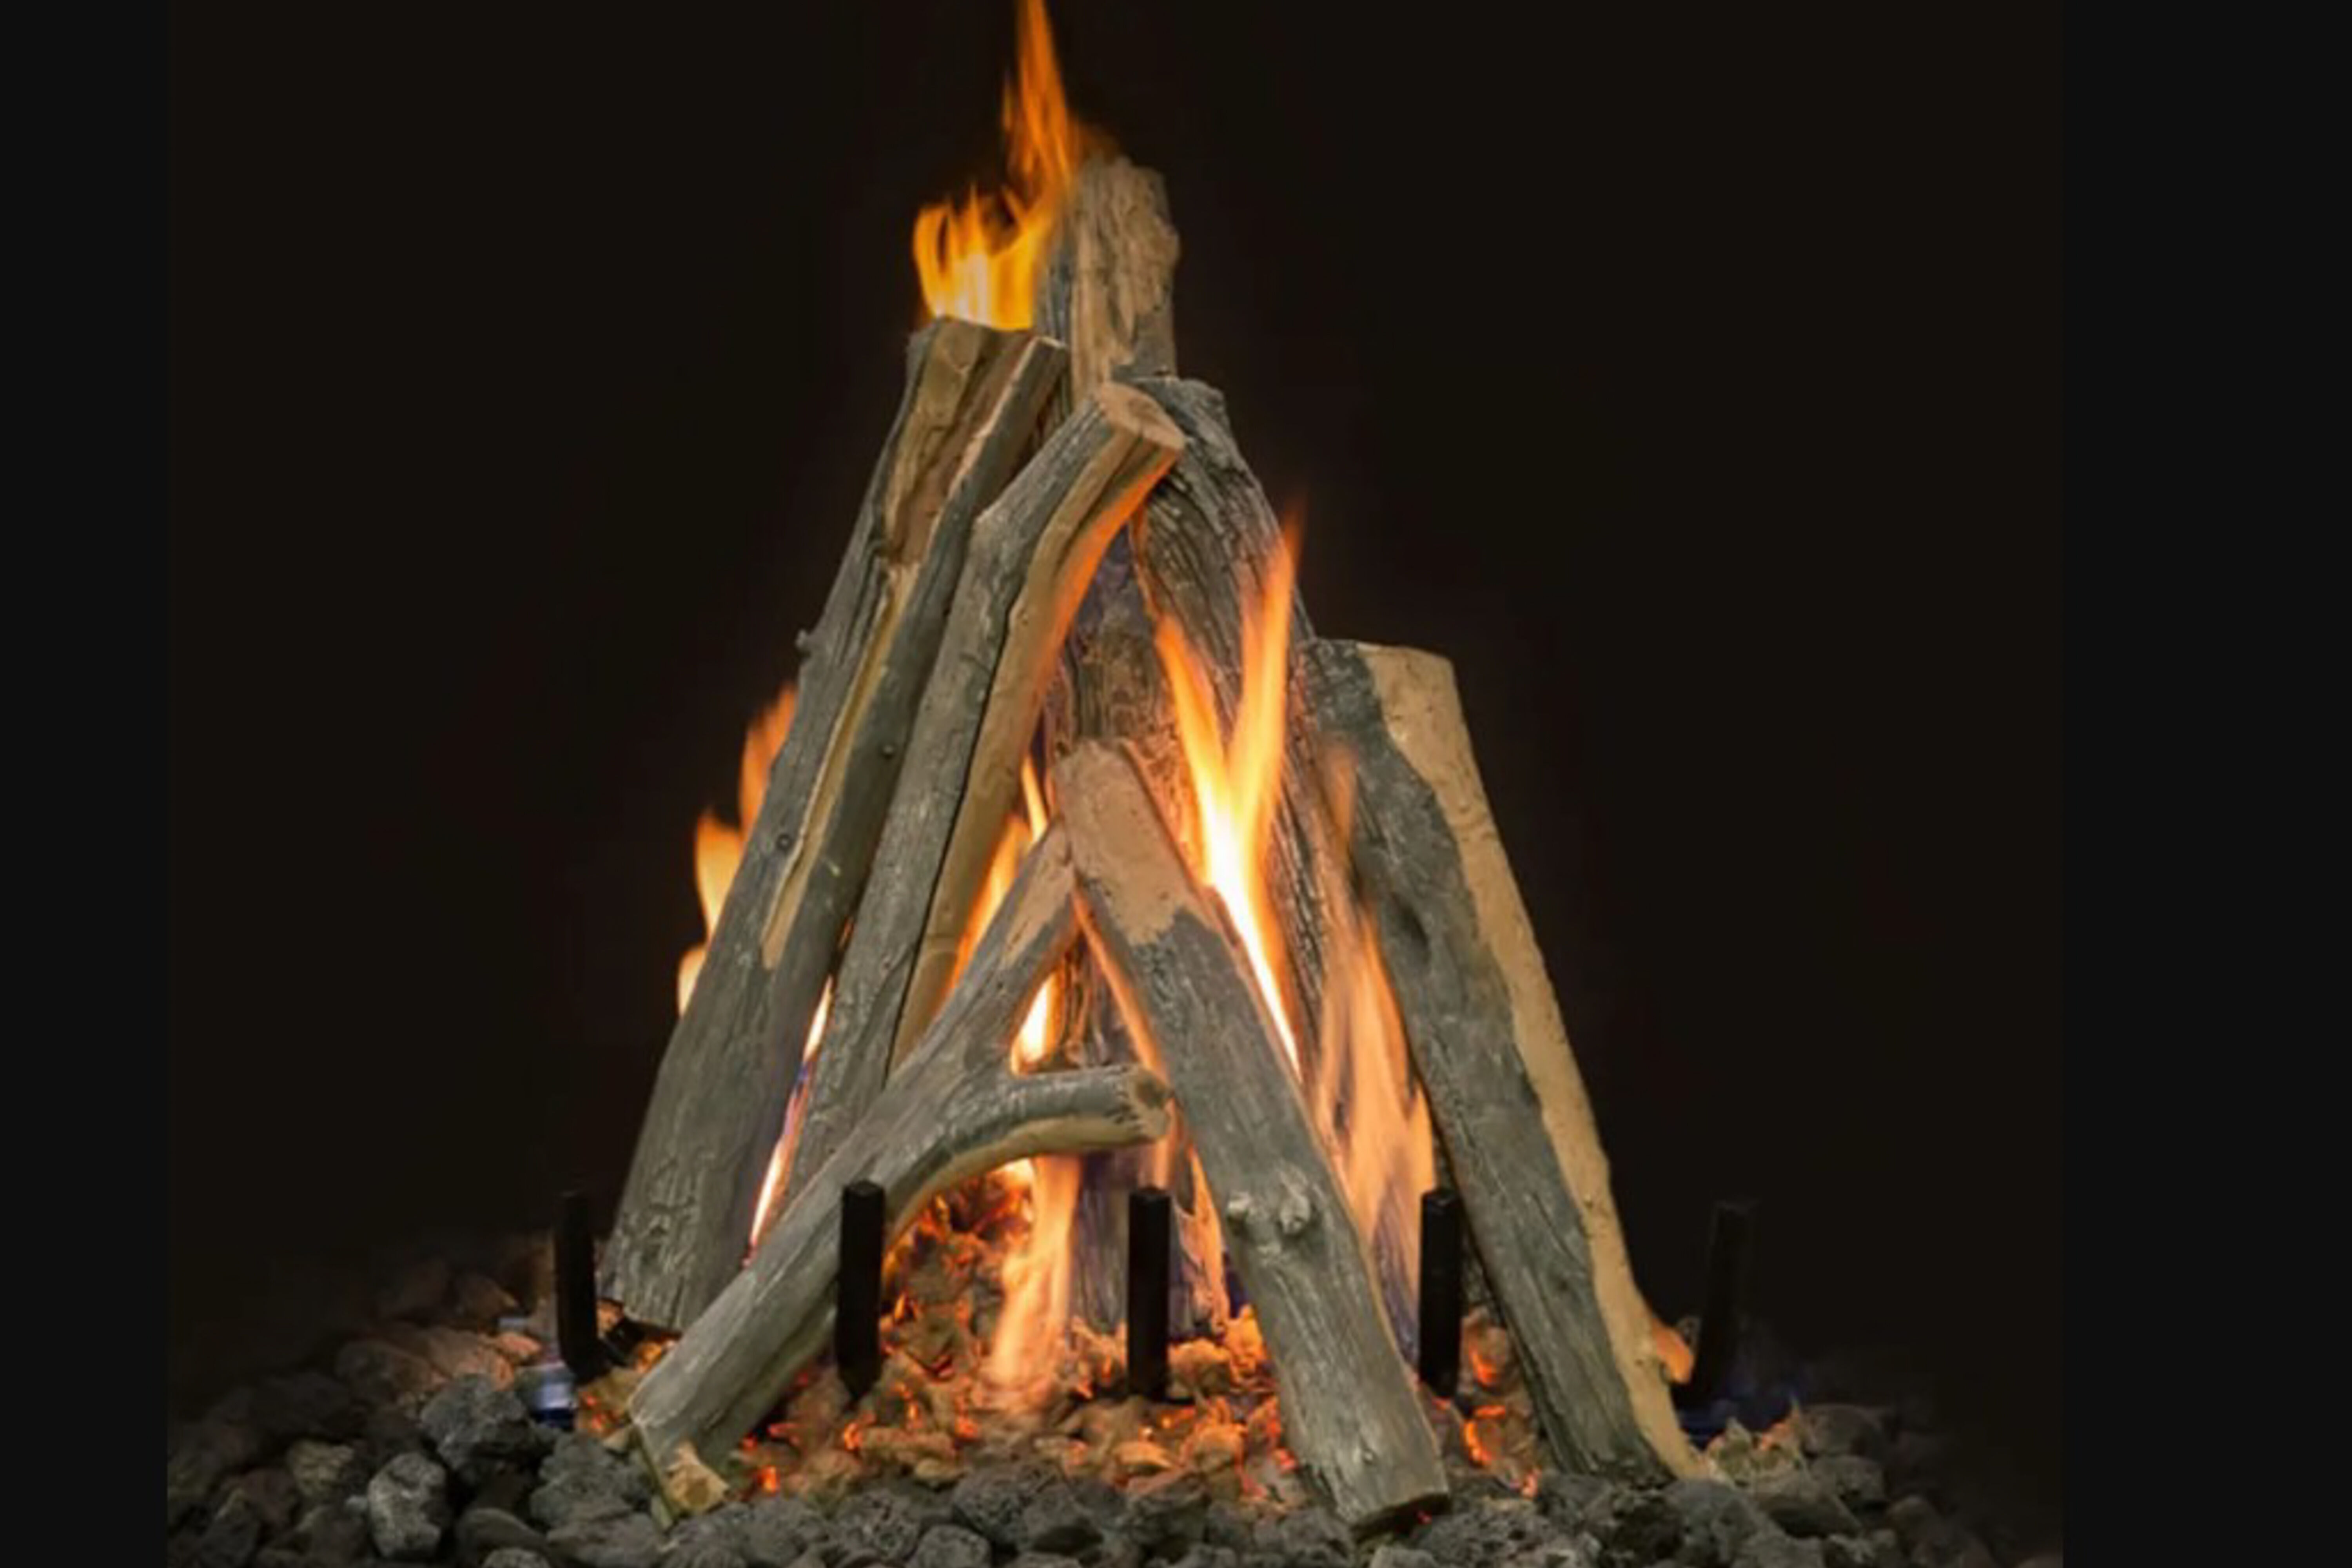 Vented Juniper-style gas logs stacked in a tee-pee style position on a black background.